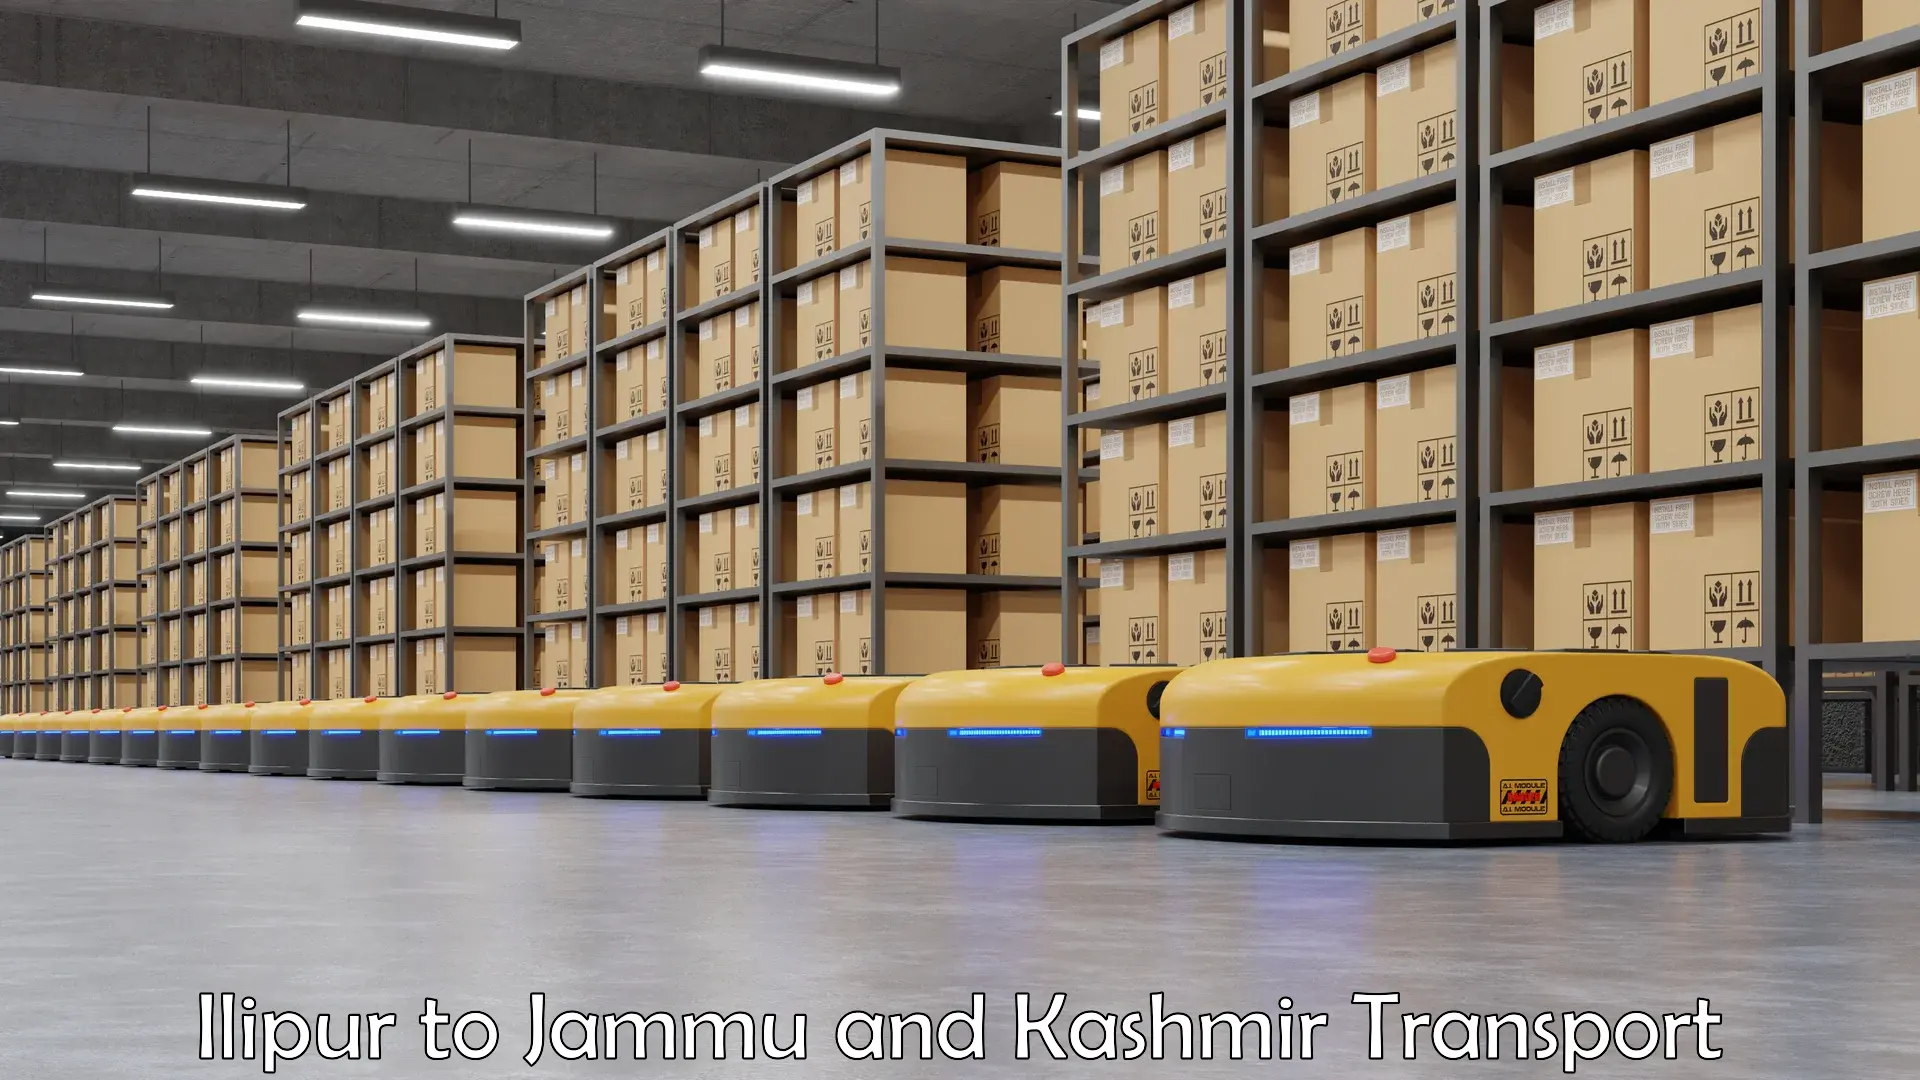 Commercial transport service Ilipur to Jammu and Kashmir